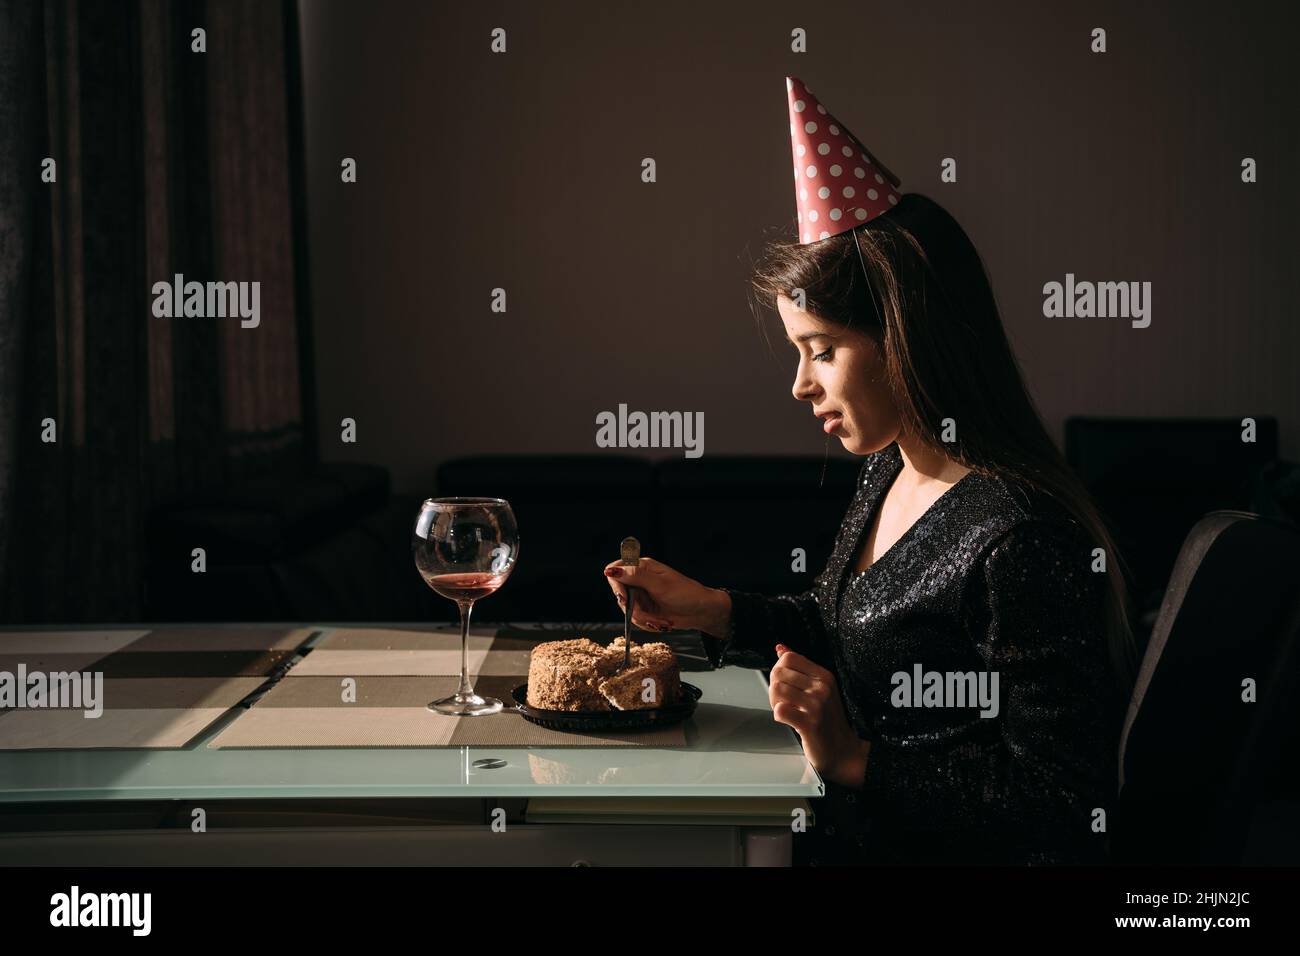 Caucasian young woman eating cake at table, female birthday party at home, holiday alone, celebrating anniversary with cake and wine, sweet dessert Stock Photo